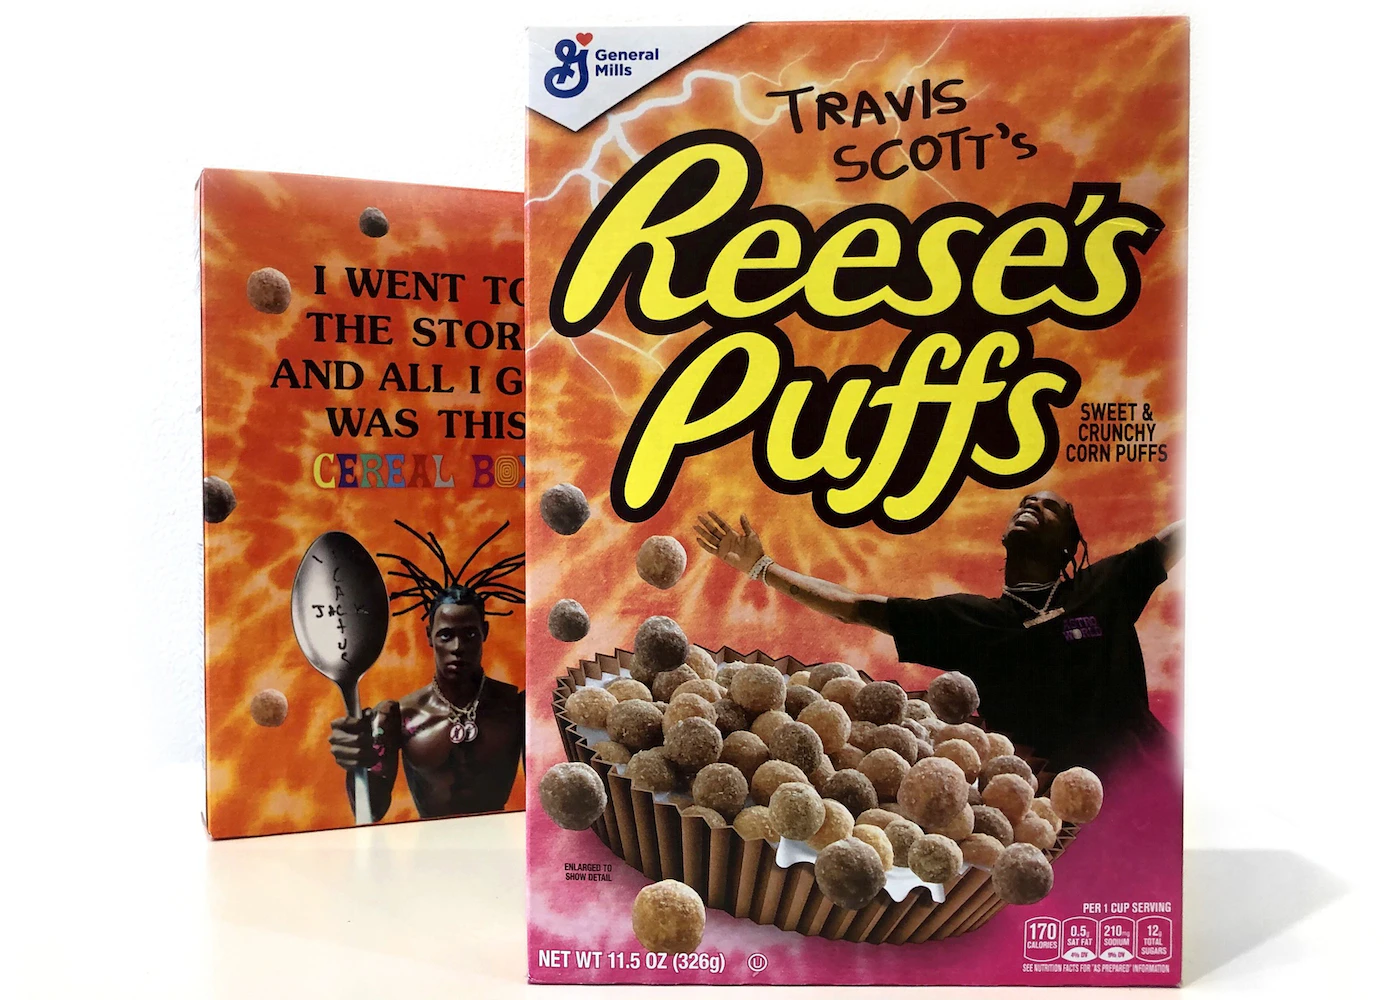 Travis Scott x Reese's Puffs Cereal (Not Fit For Human Consumption)